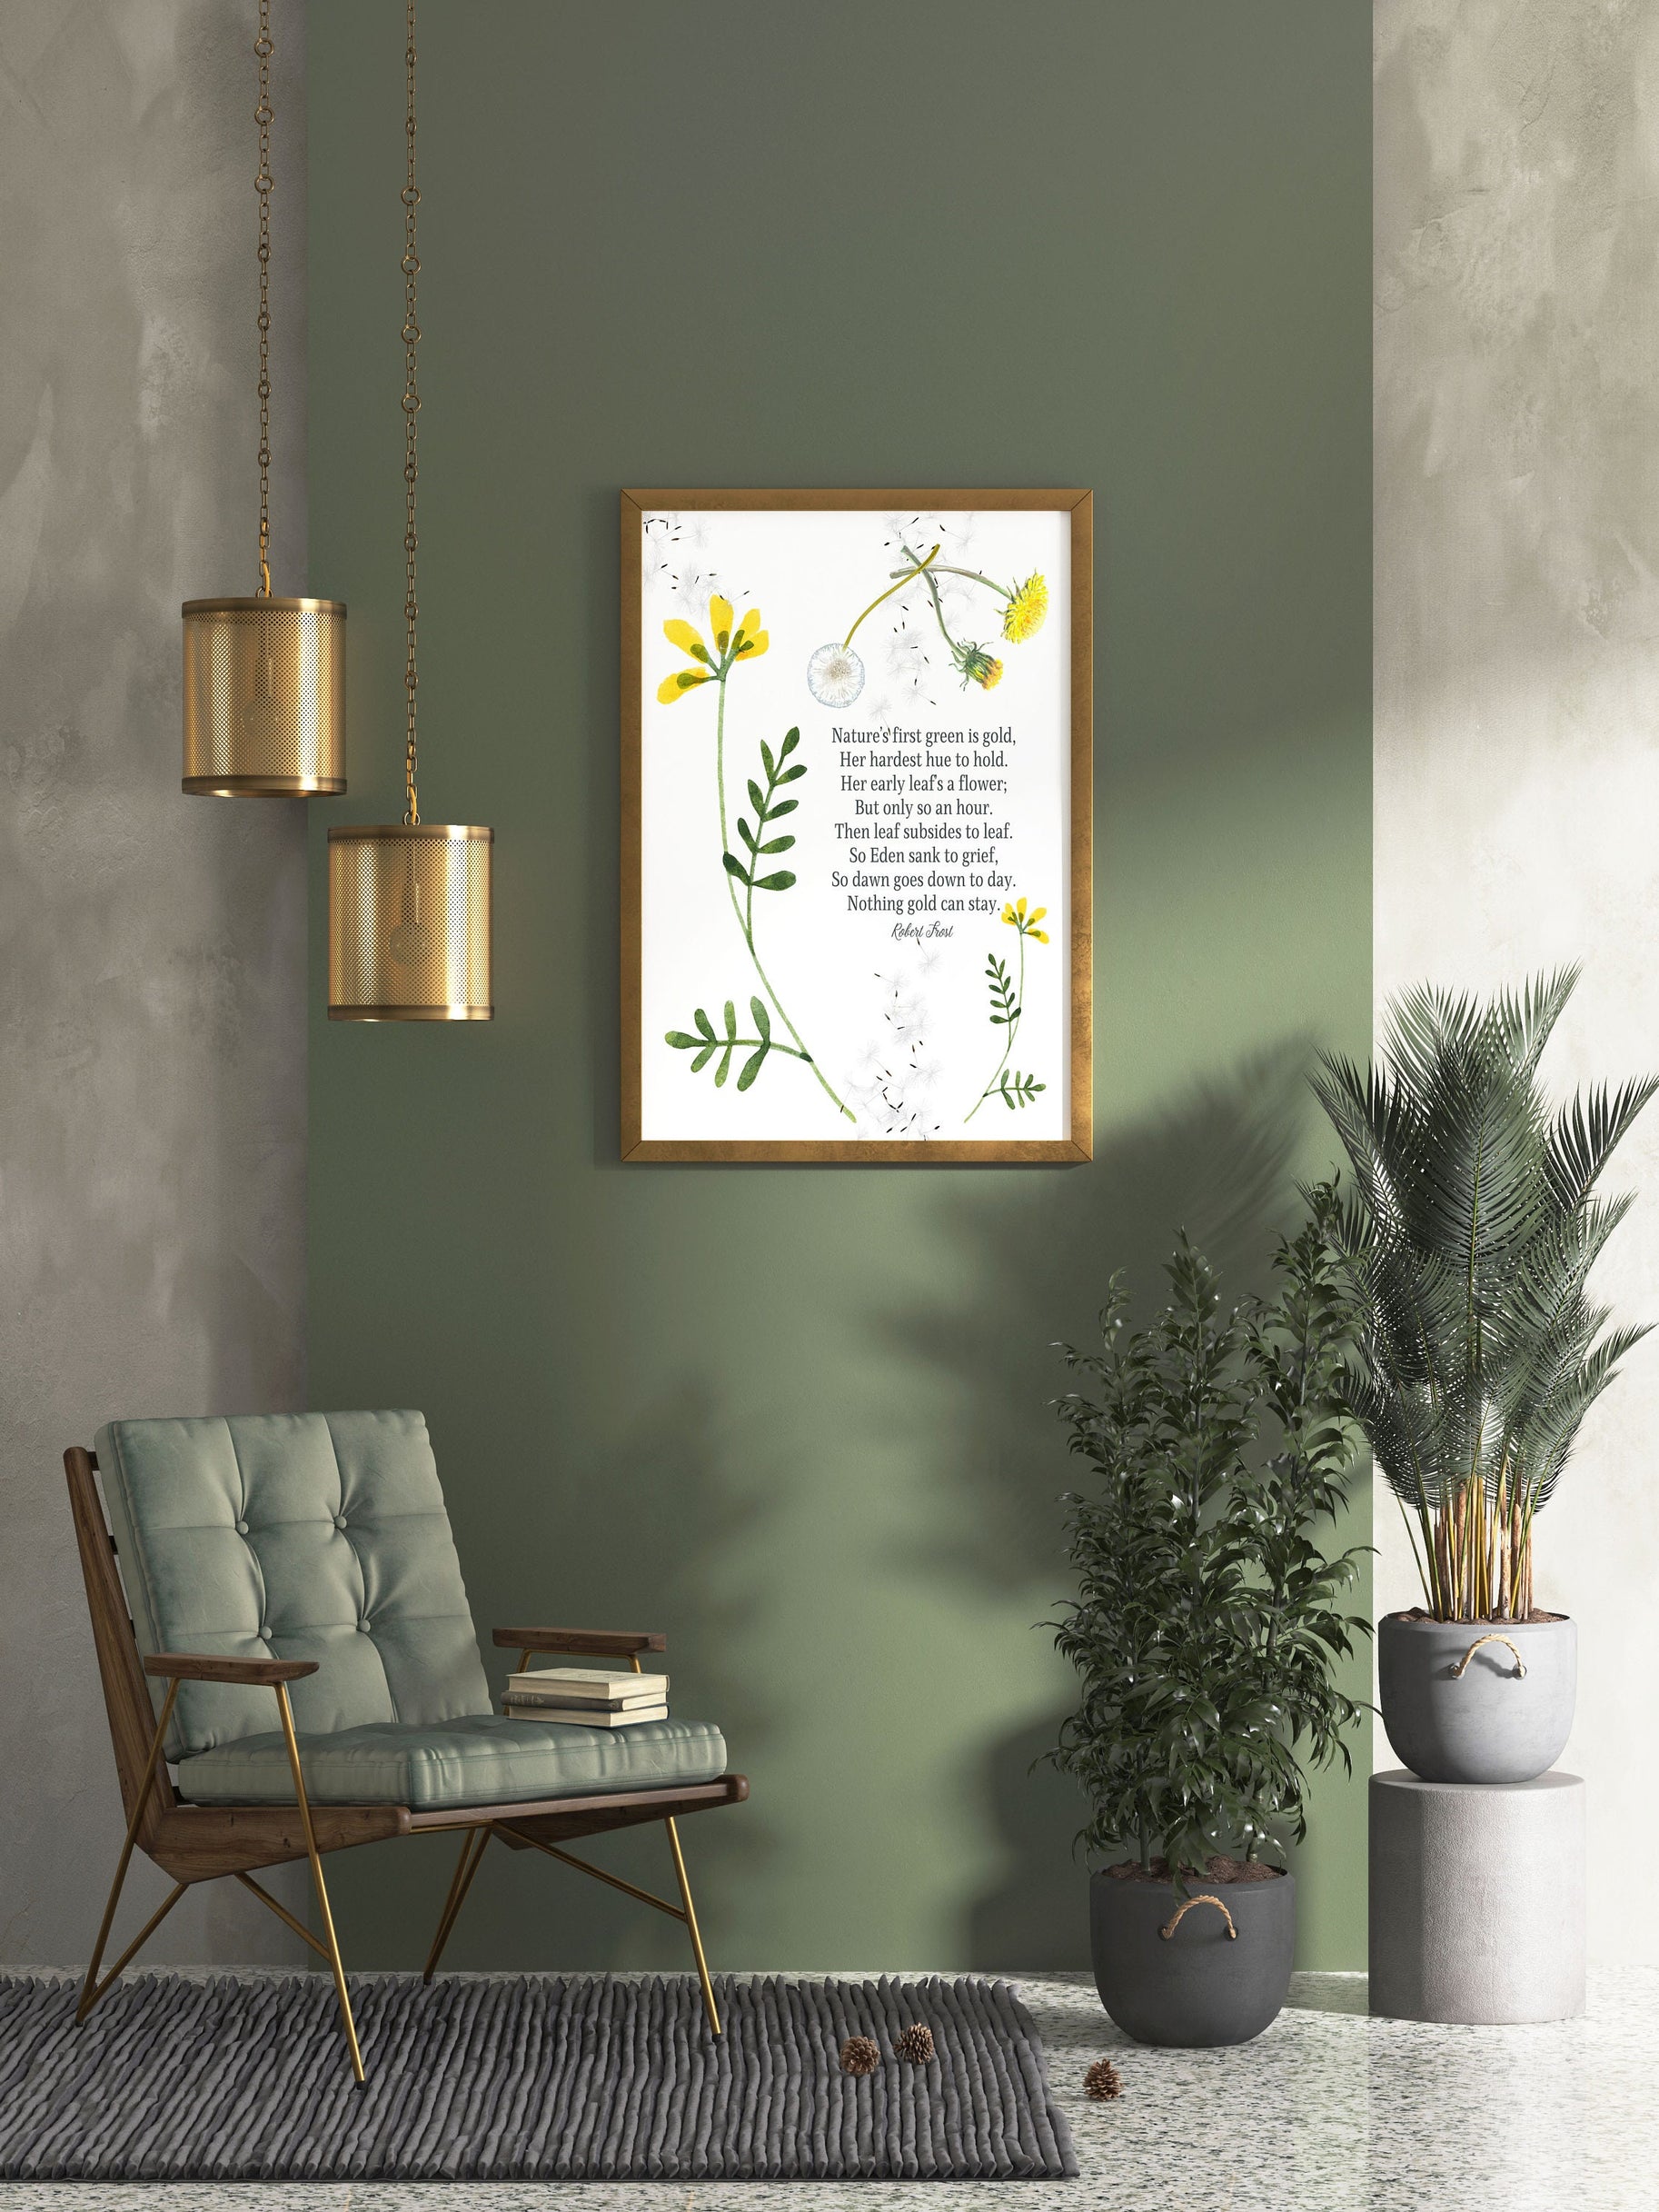 Nothing Gold Can Stay Robert Frost Wall Art Print Nature Watercolor Spring Flowers Art for Living Room Wall Art, Unframed Poem Decor